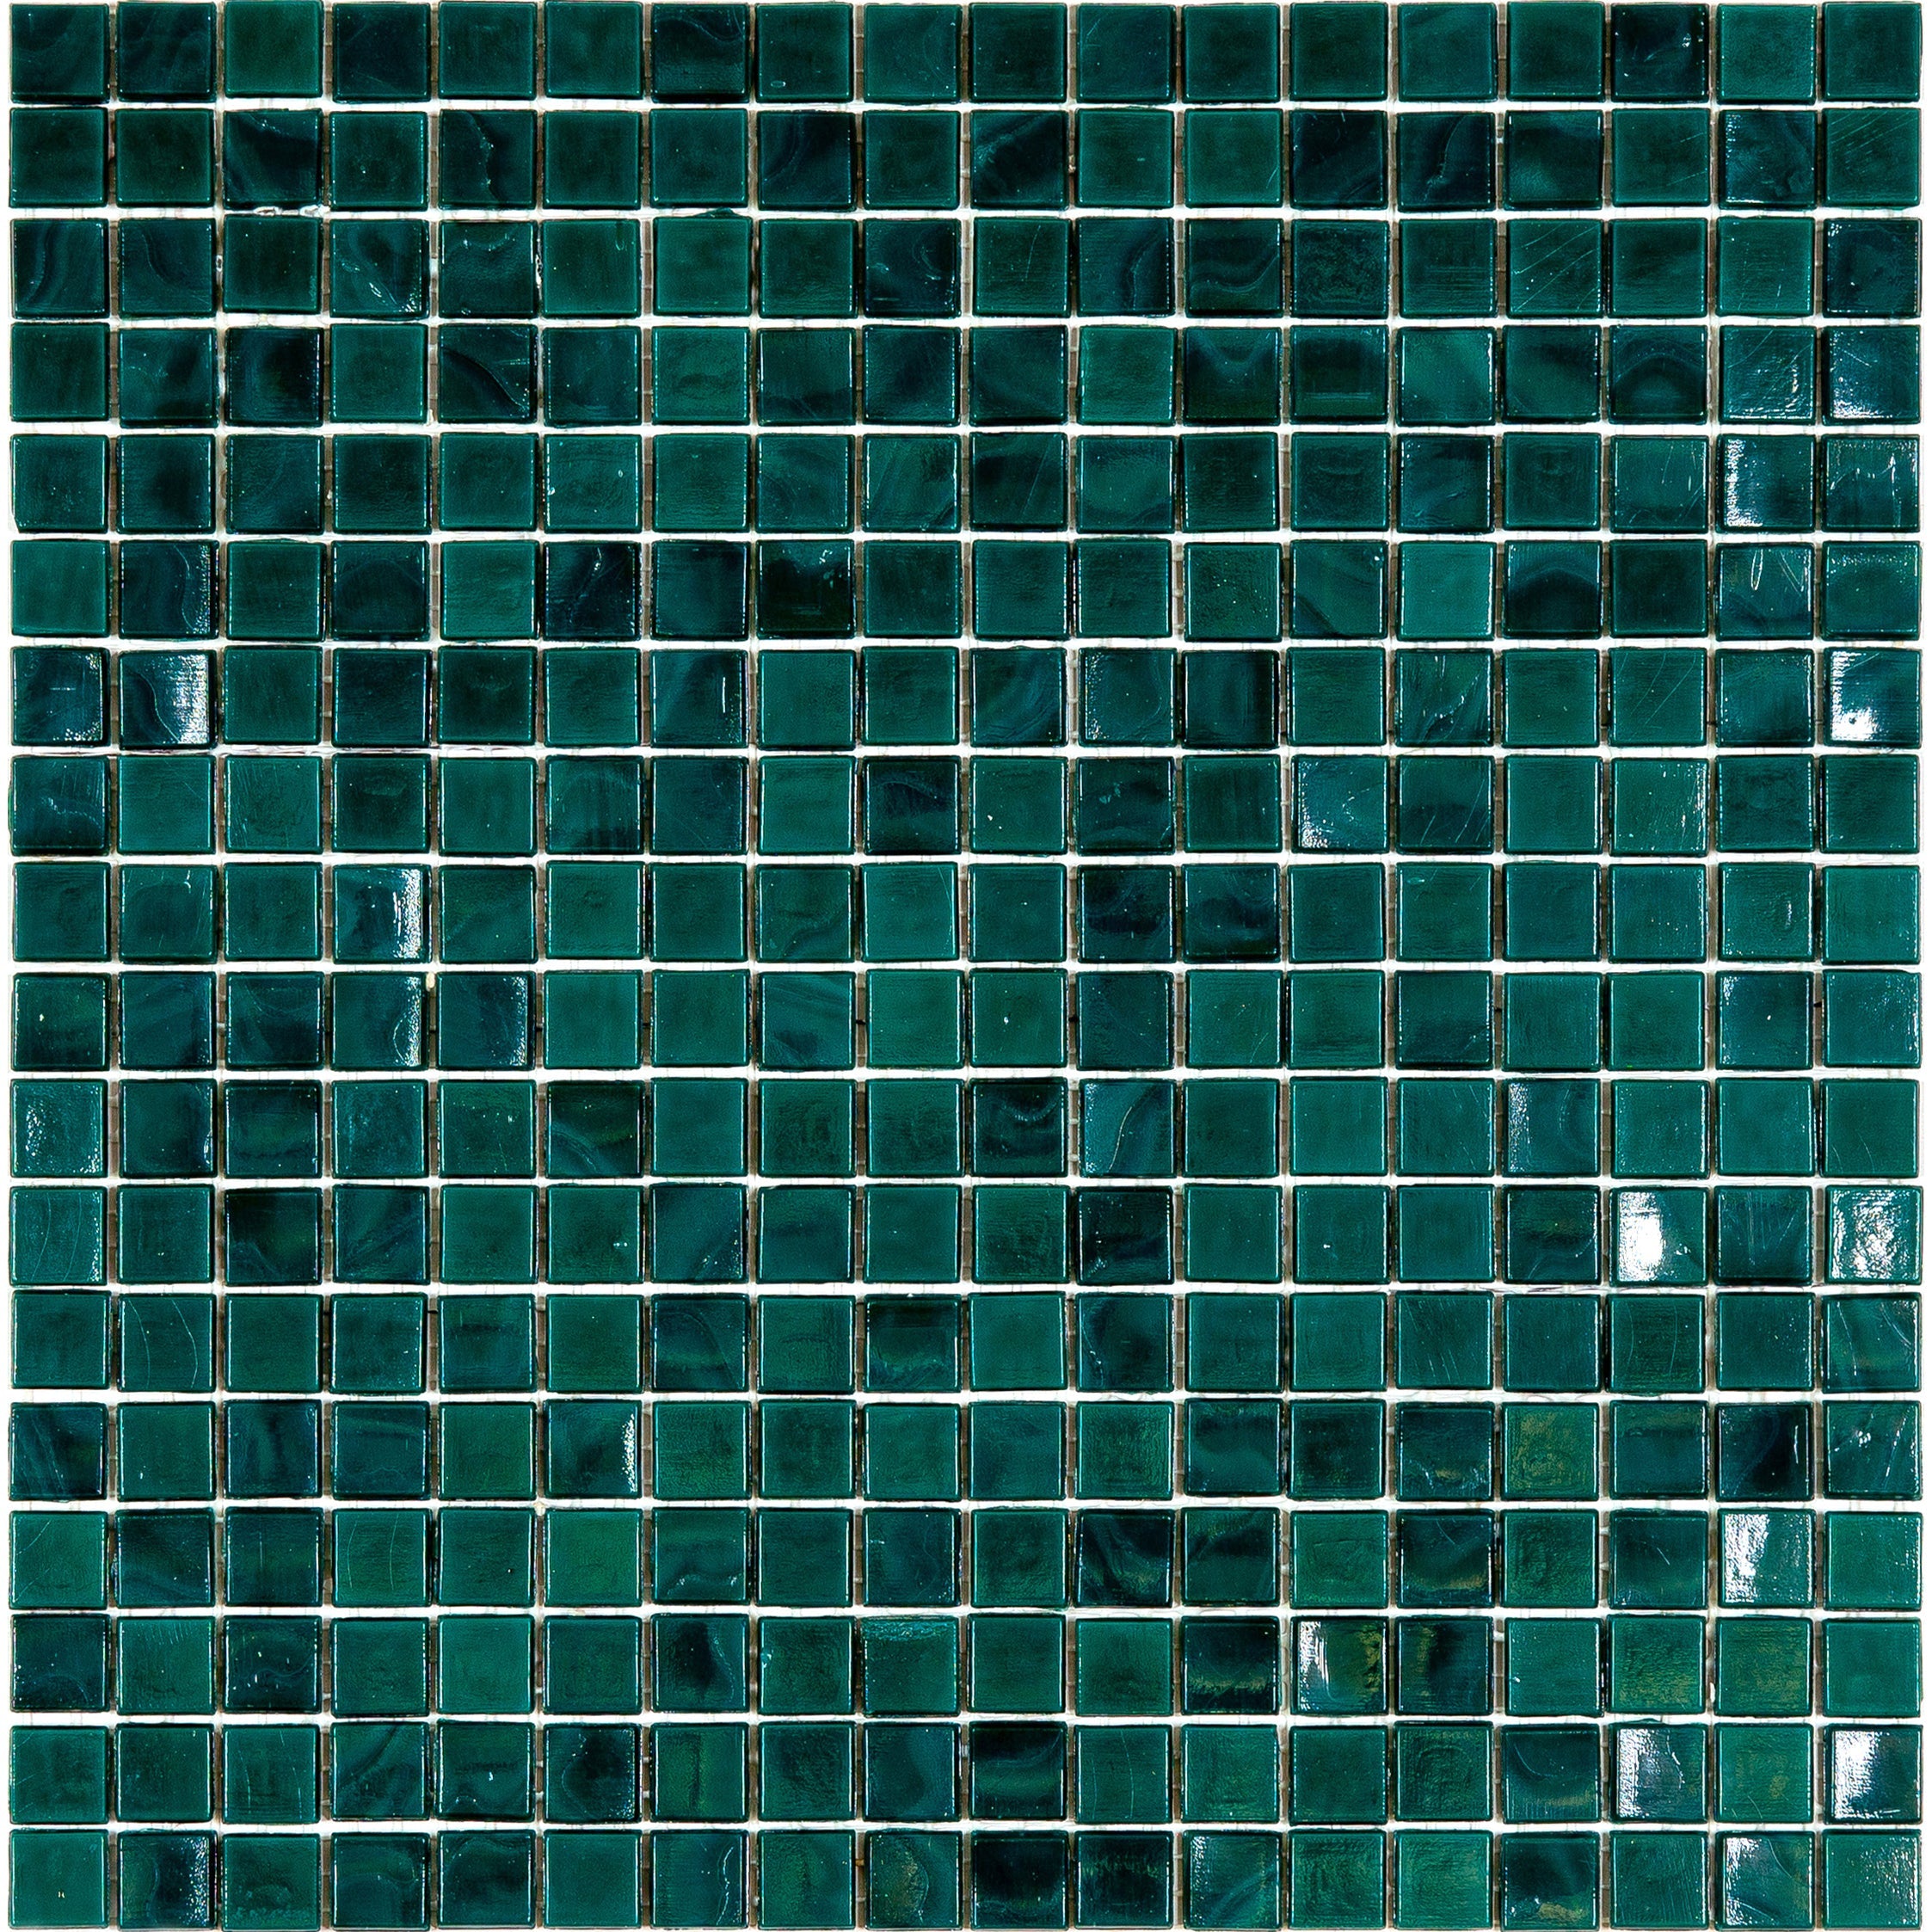 mir alma solid colors 0_6 inch nibble na76 wall and floor mosaic distributed by surface group natural materials